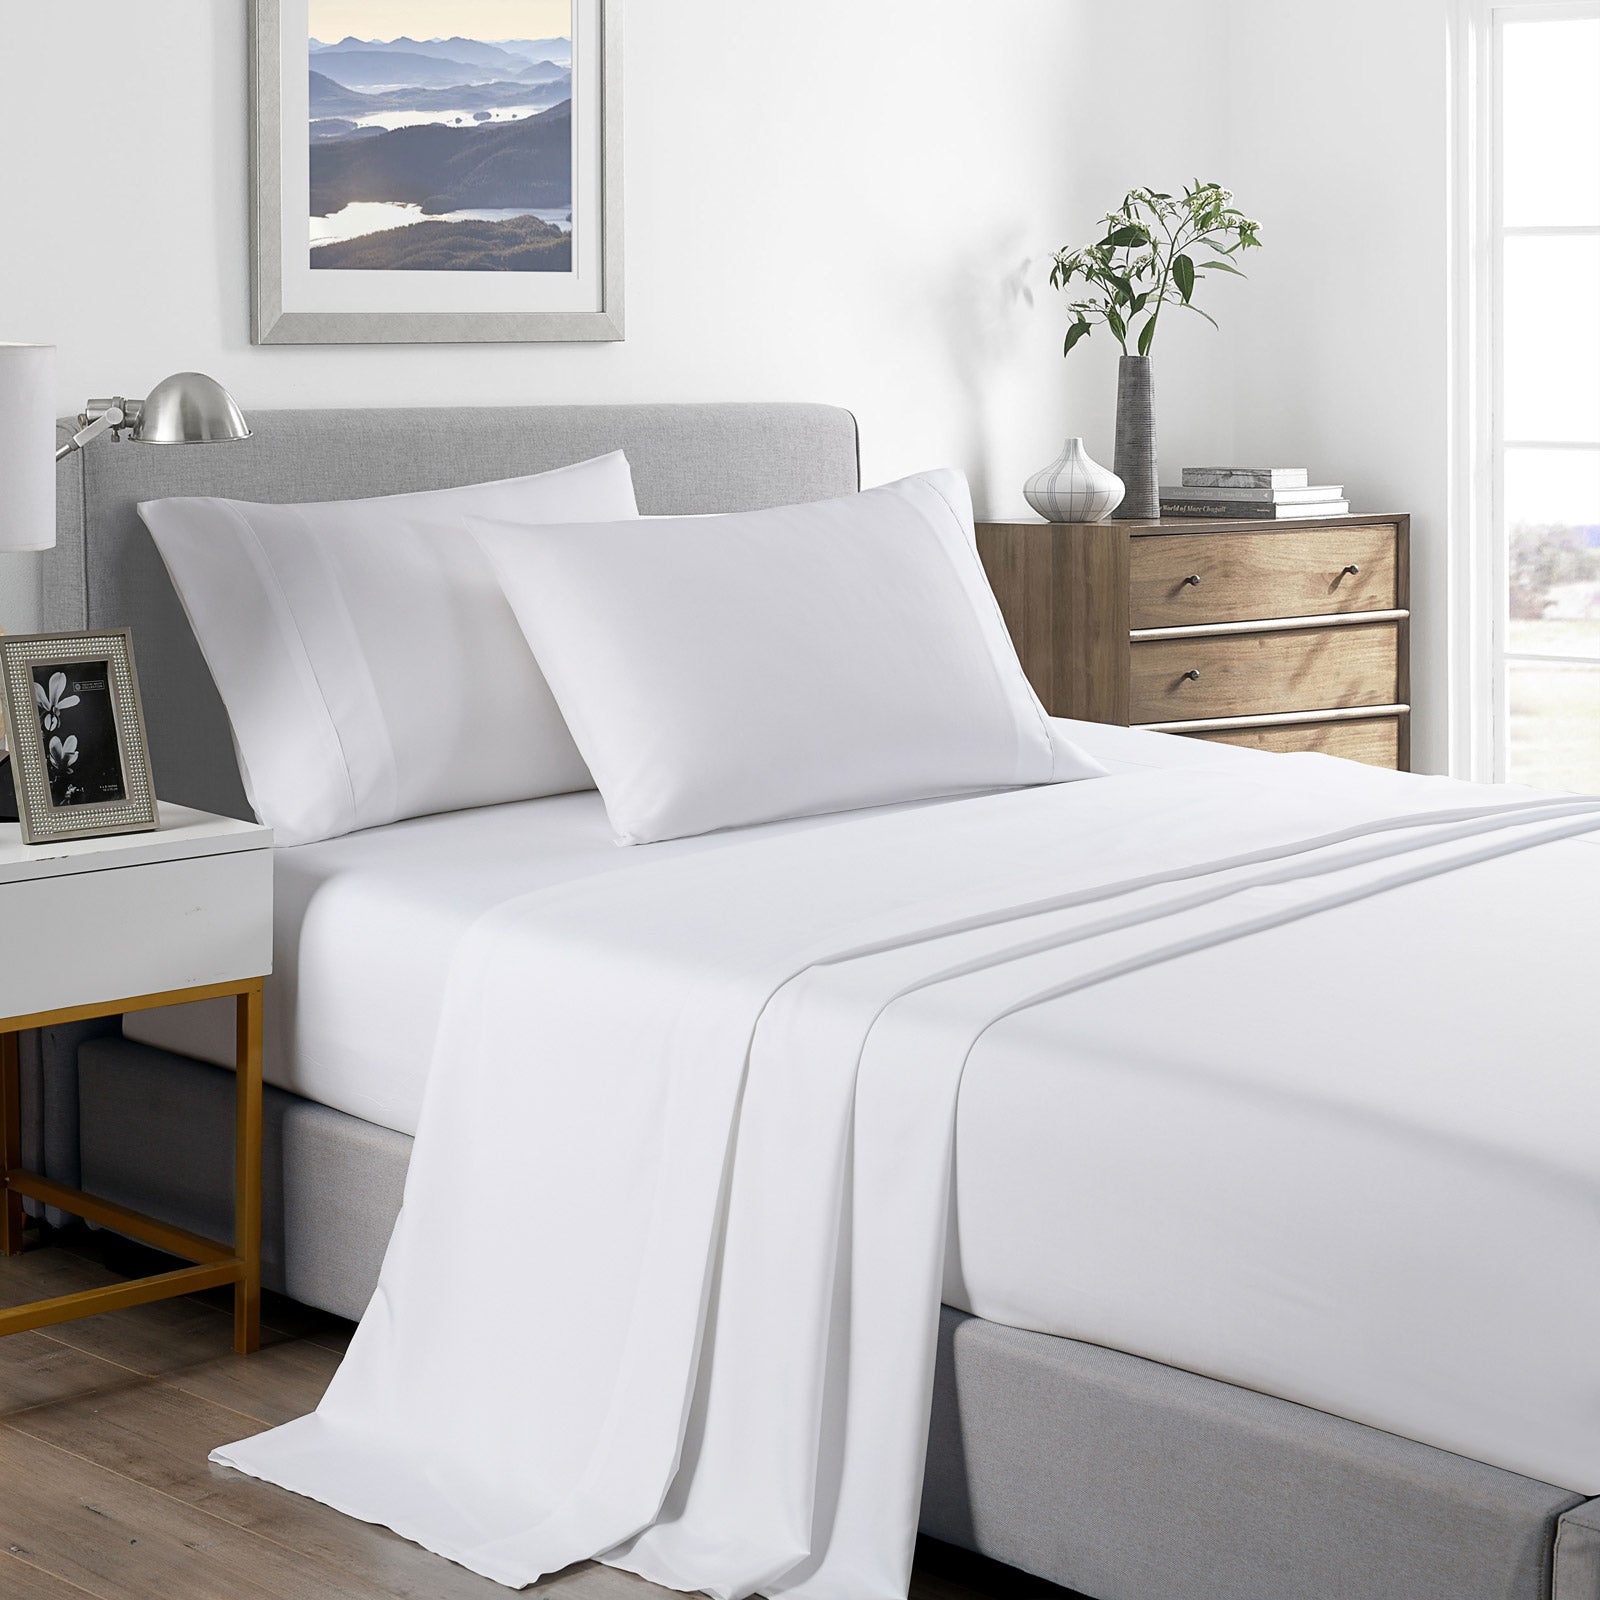 Royal Comfort 2000 Thread Count Bamboo Cooling Sheet Set Ultra Soft Bedding - King - White